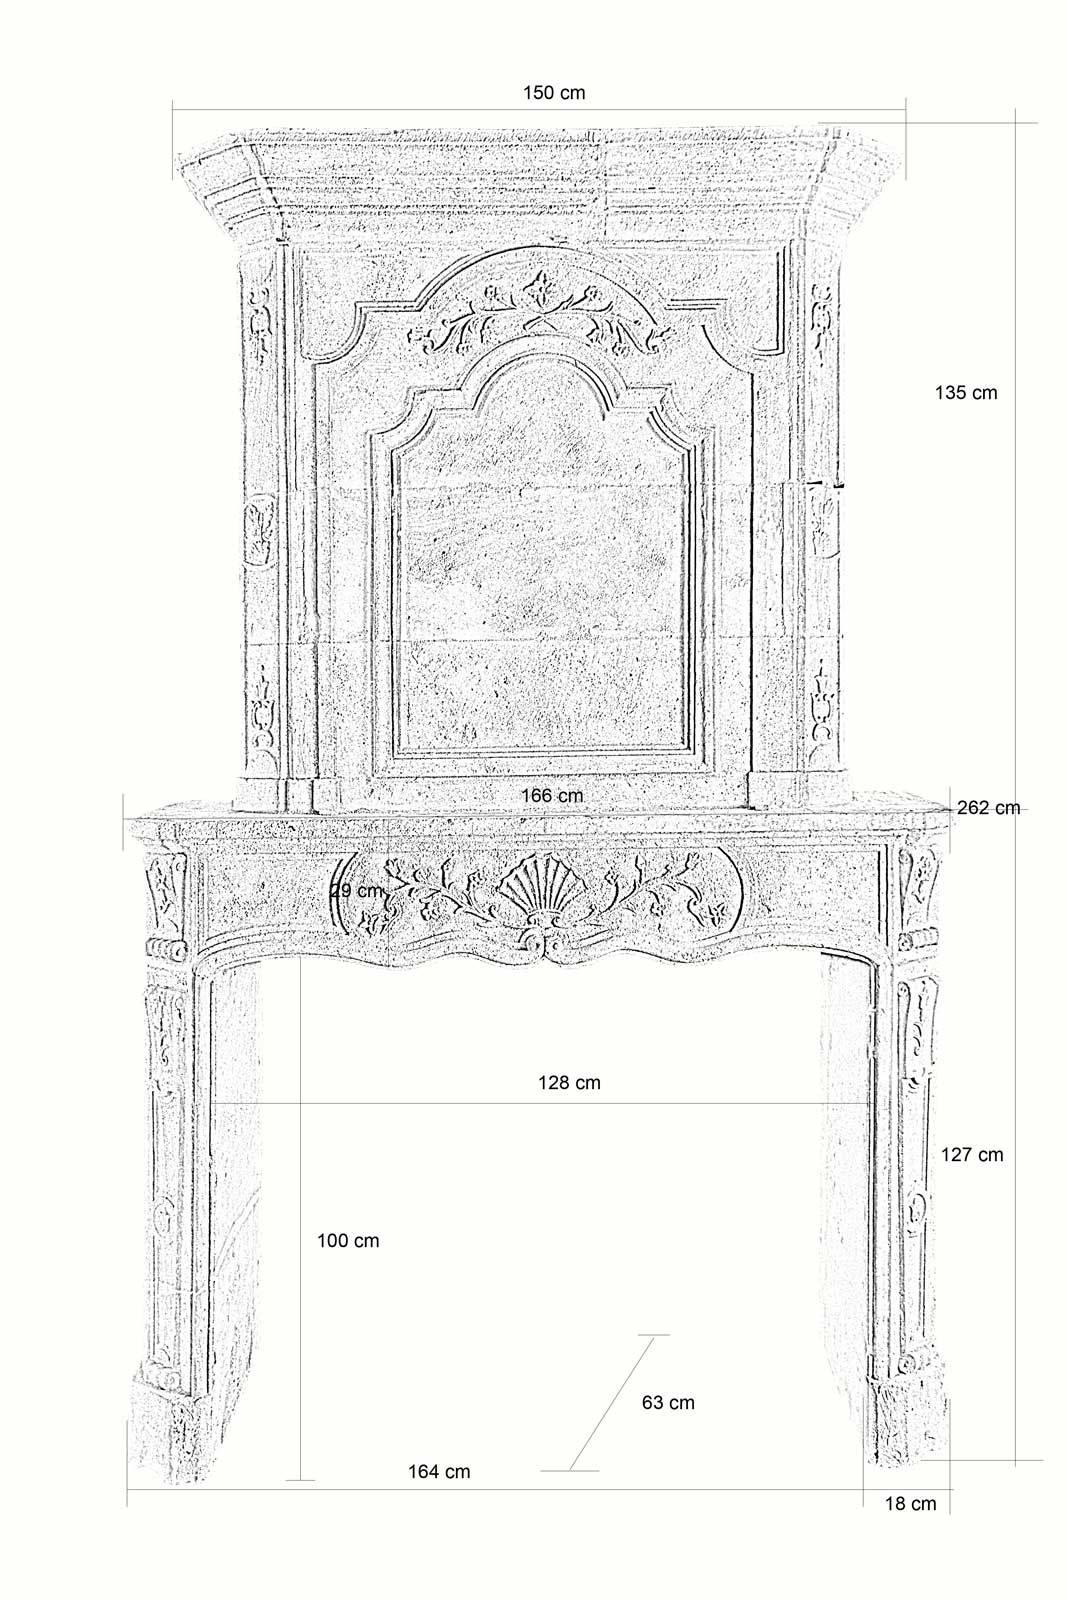 Dating back to the early 18th century, Regency stone fireplace. The overmantel is animated of two molded frames cocked hat profile, vegetal patterns and many setbacks at the cornice. The eventful lintel is carved in the middle part of a fan and